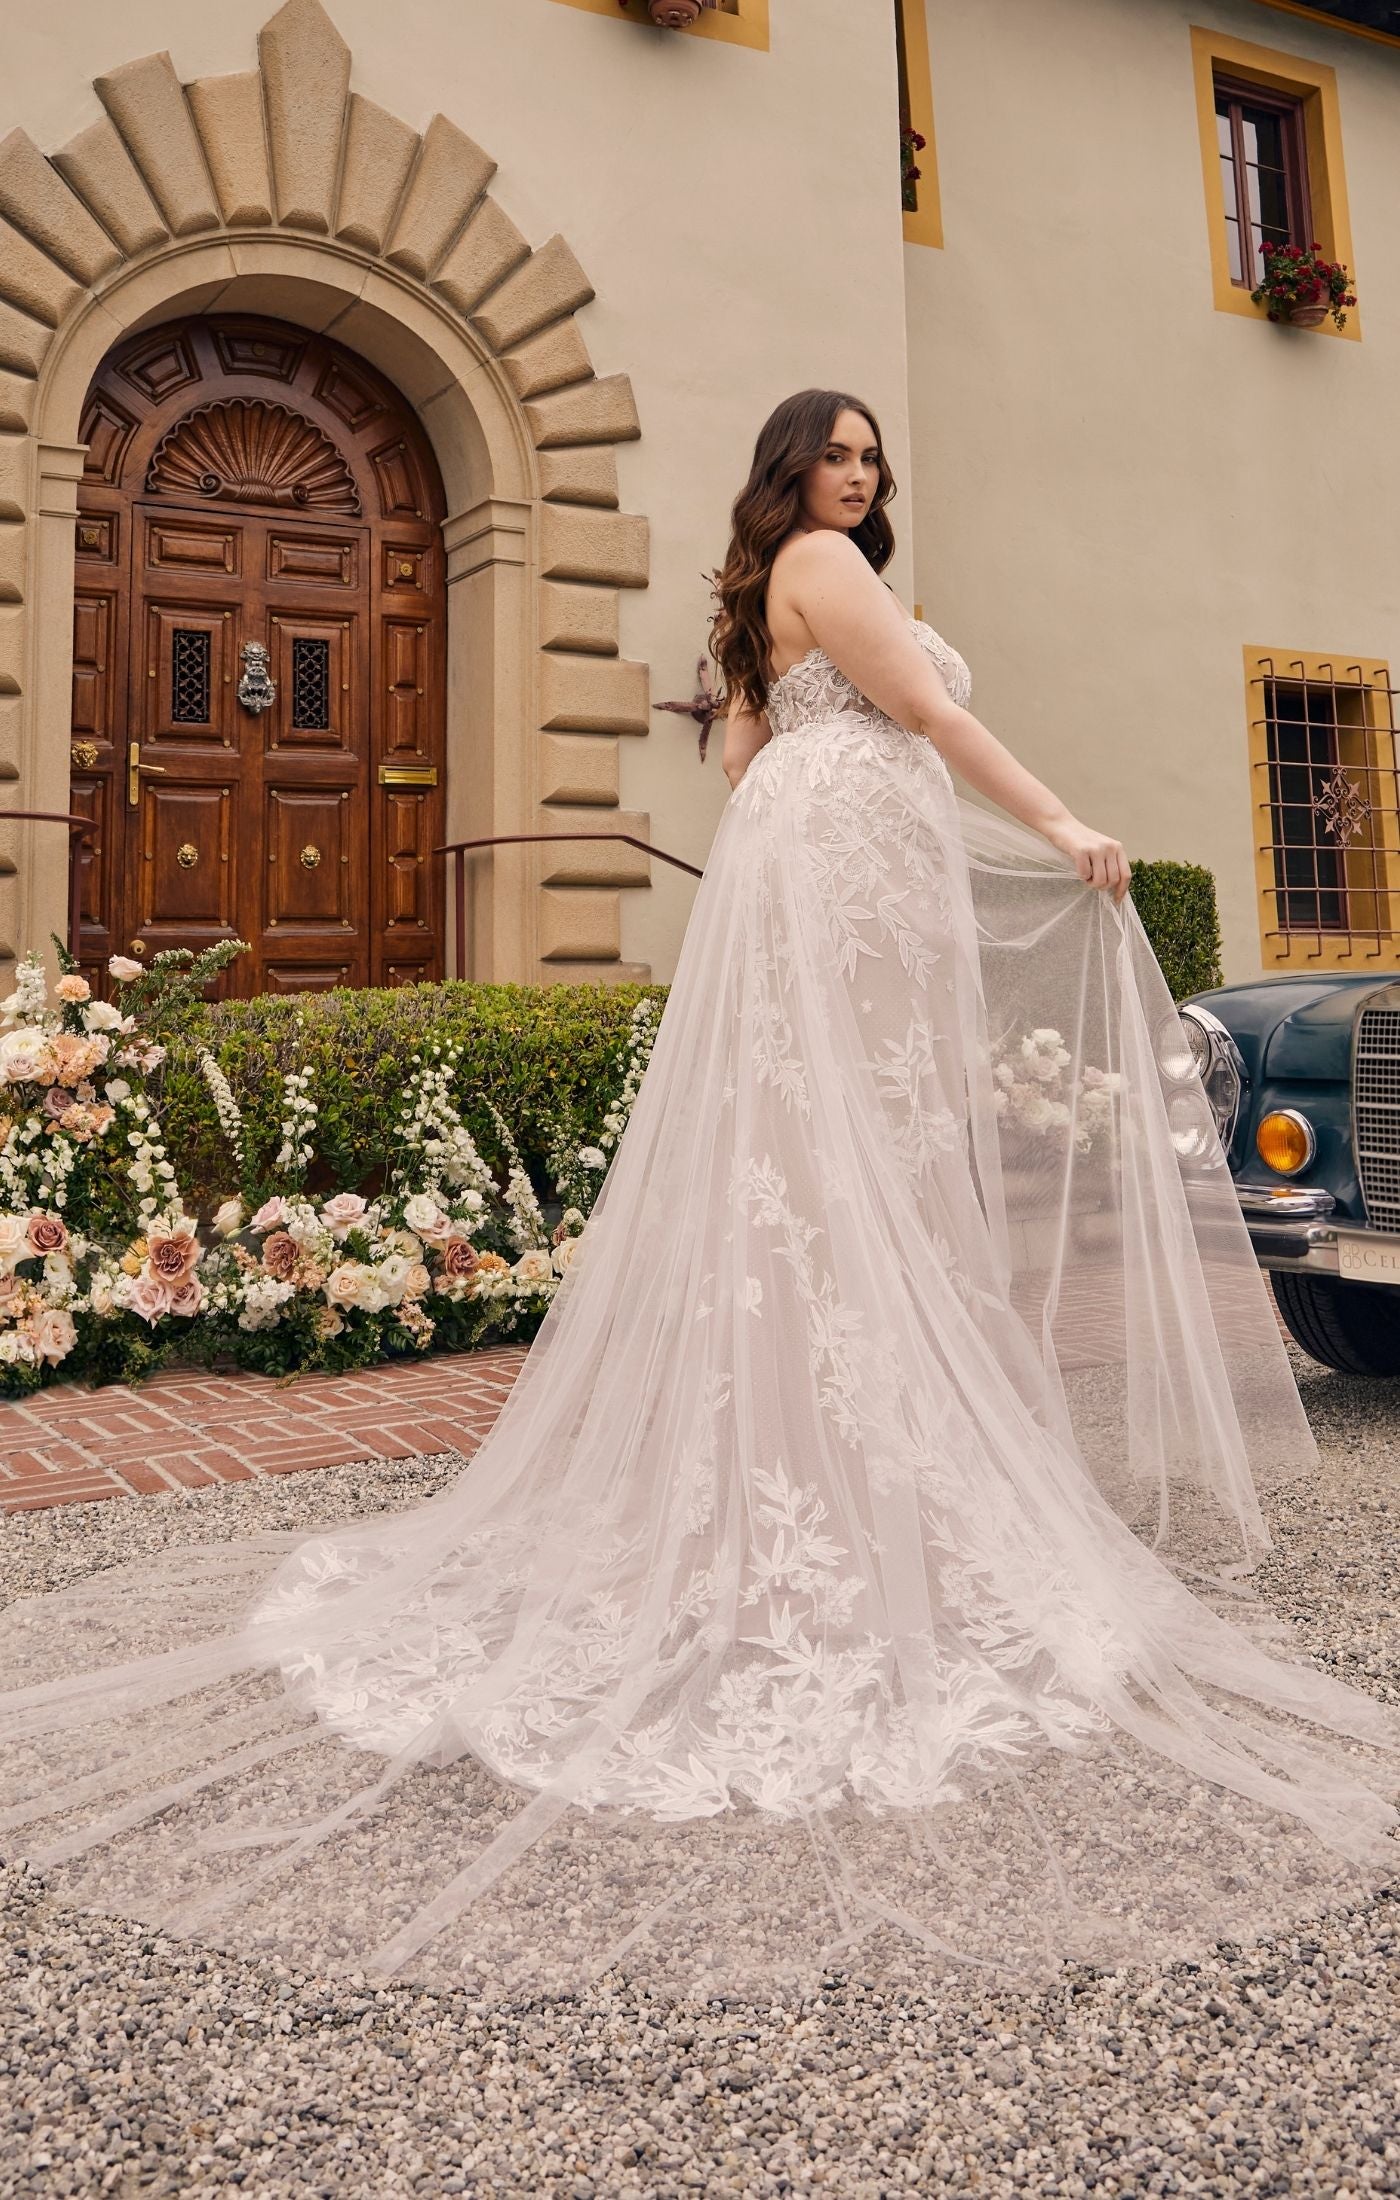 Casablanca Bridal 2548 Jacqueline A-Line Ballgown Off The Shoulder Sheer Floral Tulle Appliques Train Wedding Dress. An A-Line skirt matching style 2548-1 made of tulle with sequined floral lace delicate trim at the waistline.